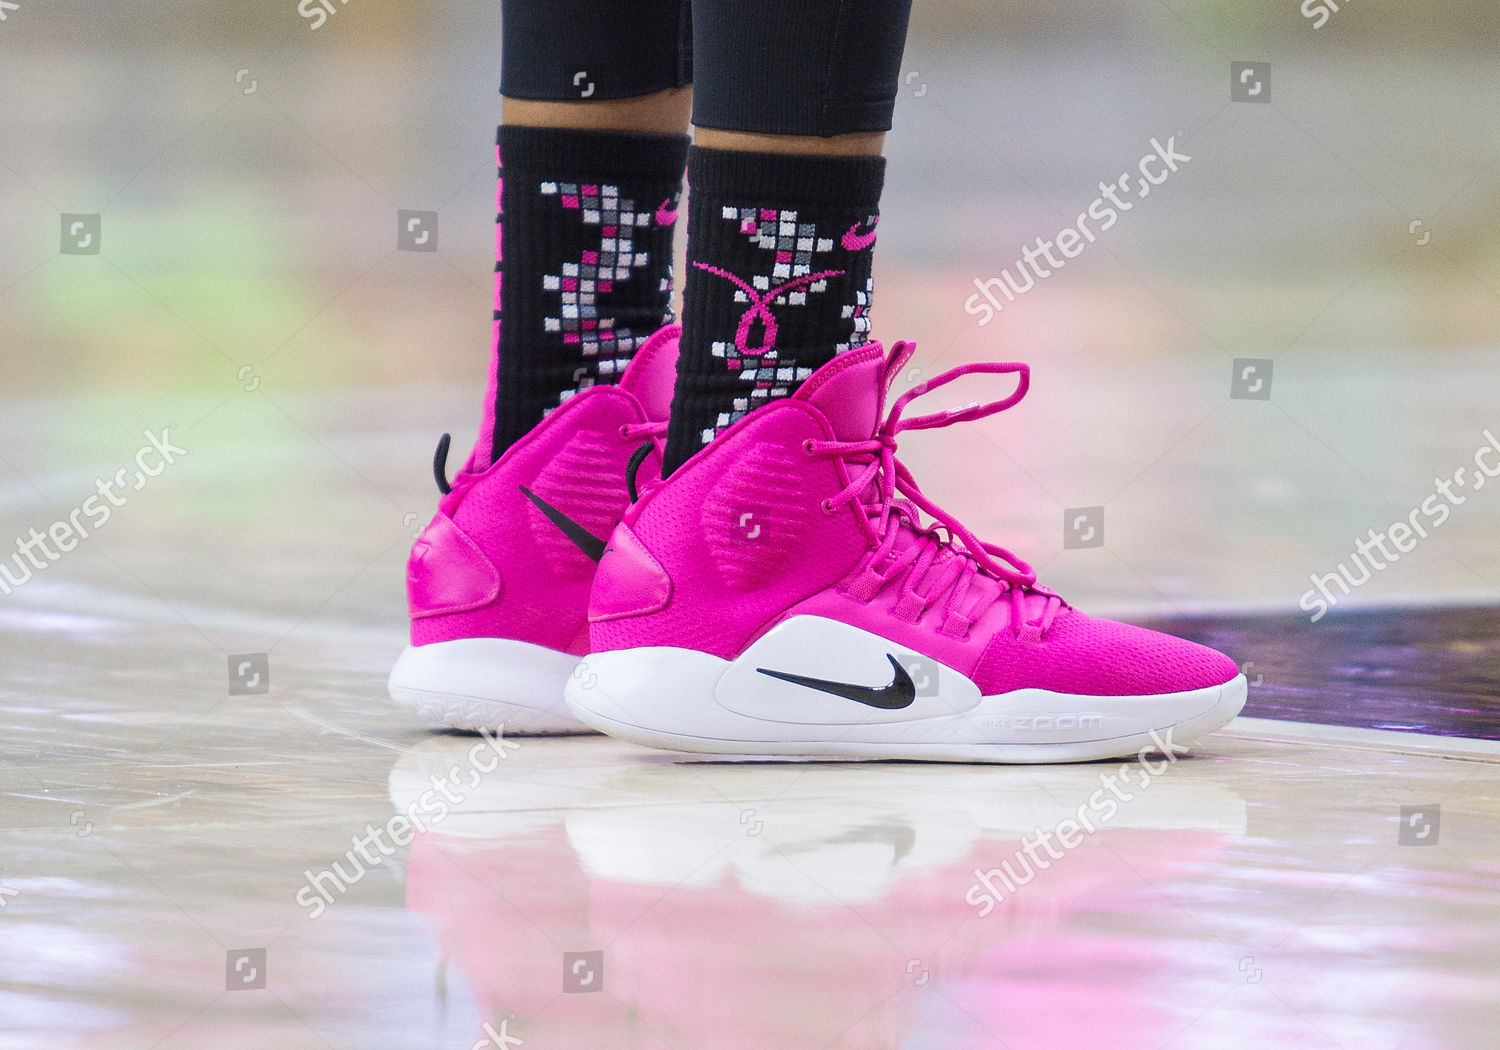 ncaa pink shoes